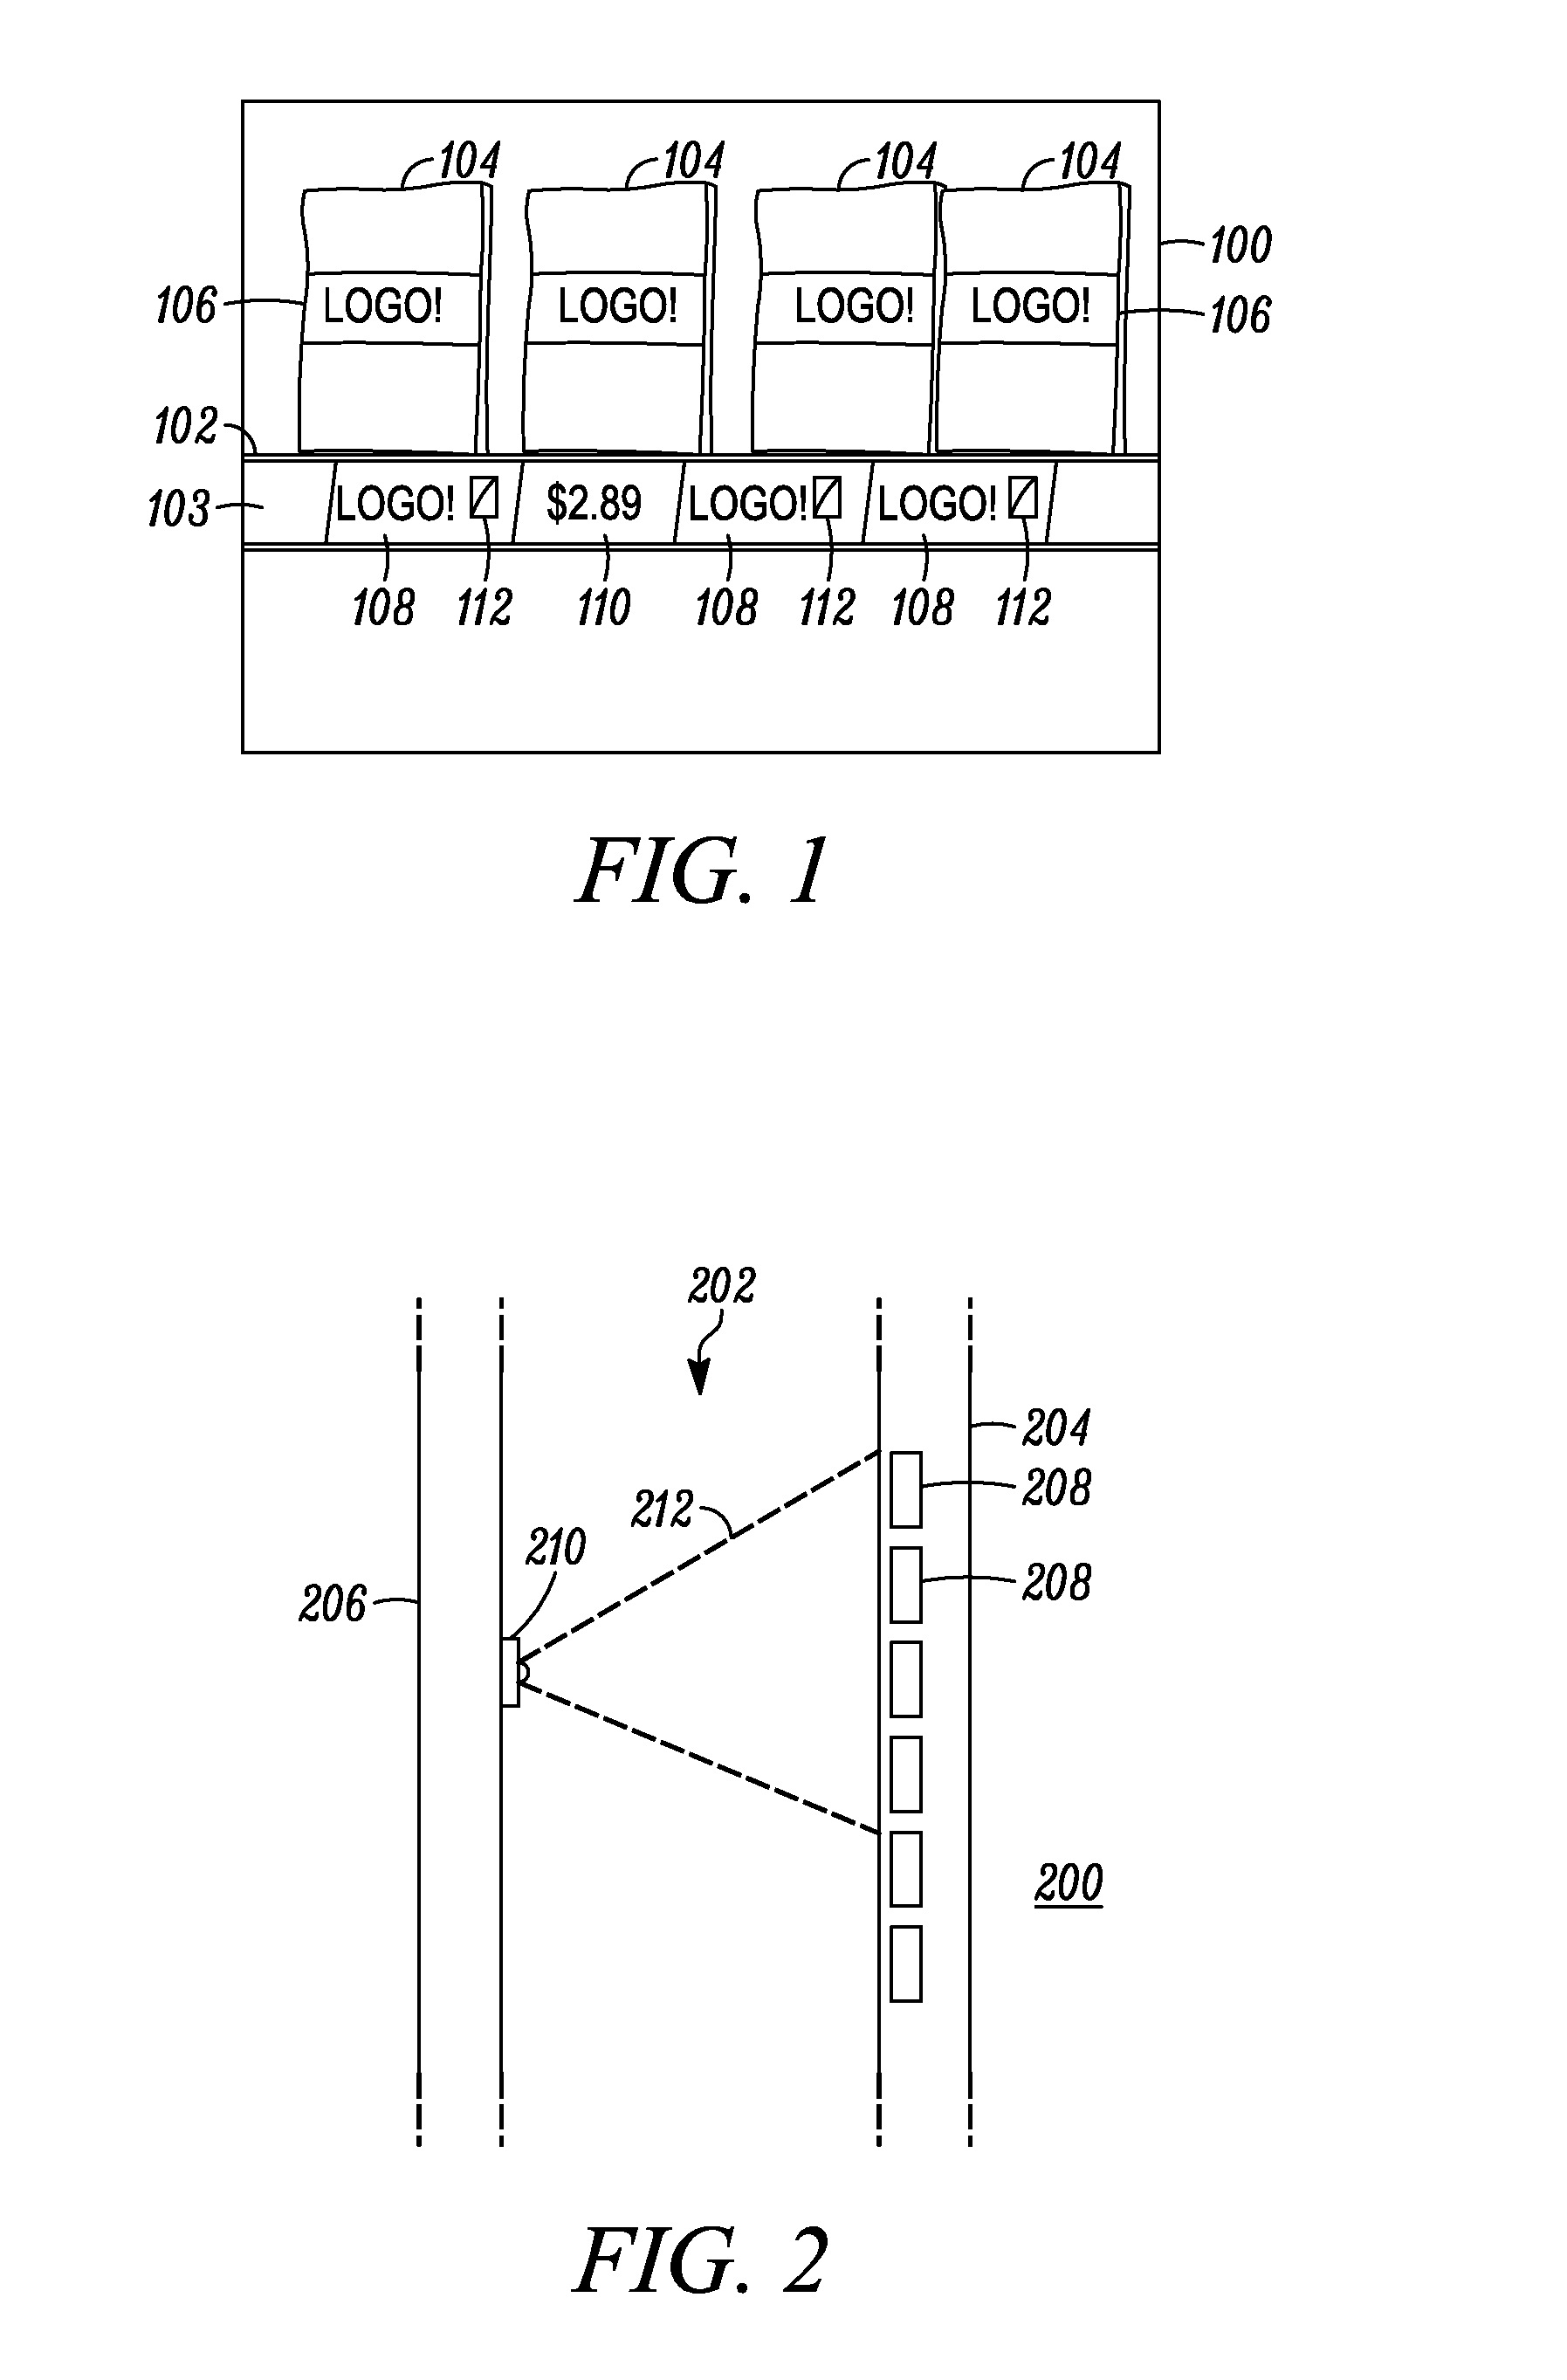 Method and apparatus for image processing to avoid counting shelf edge promotional labels when counting product labels